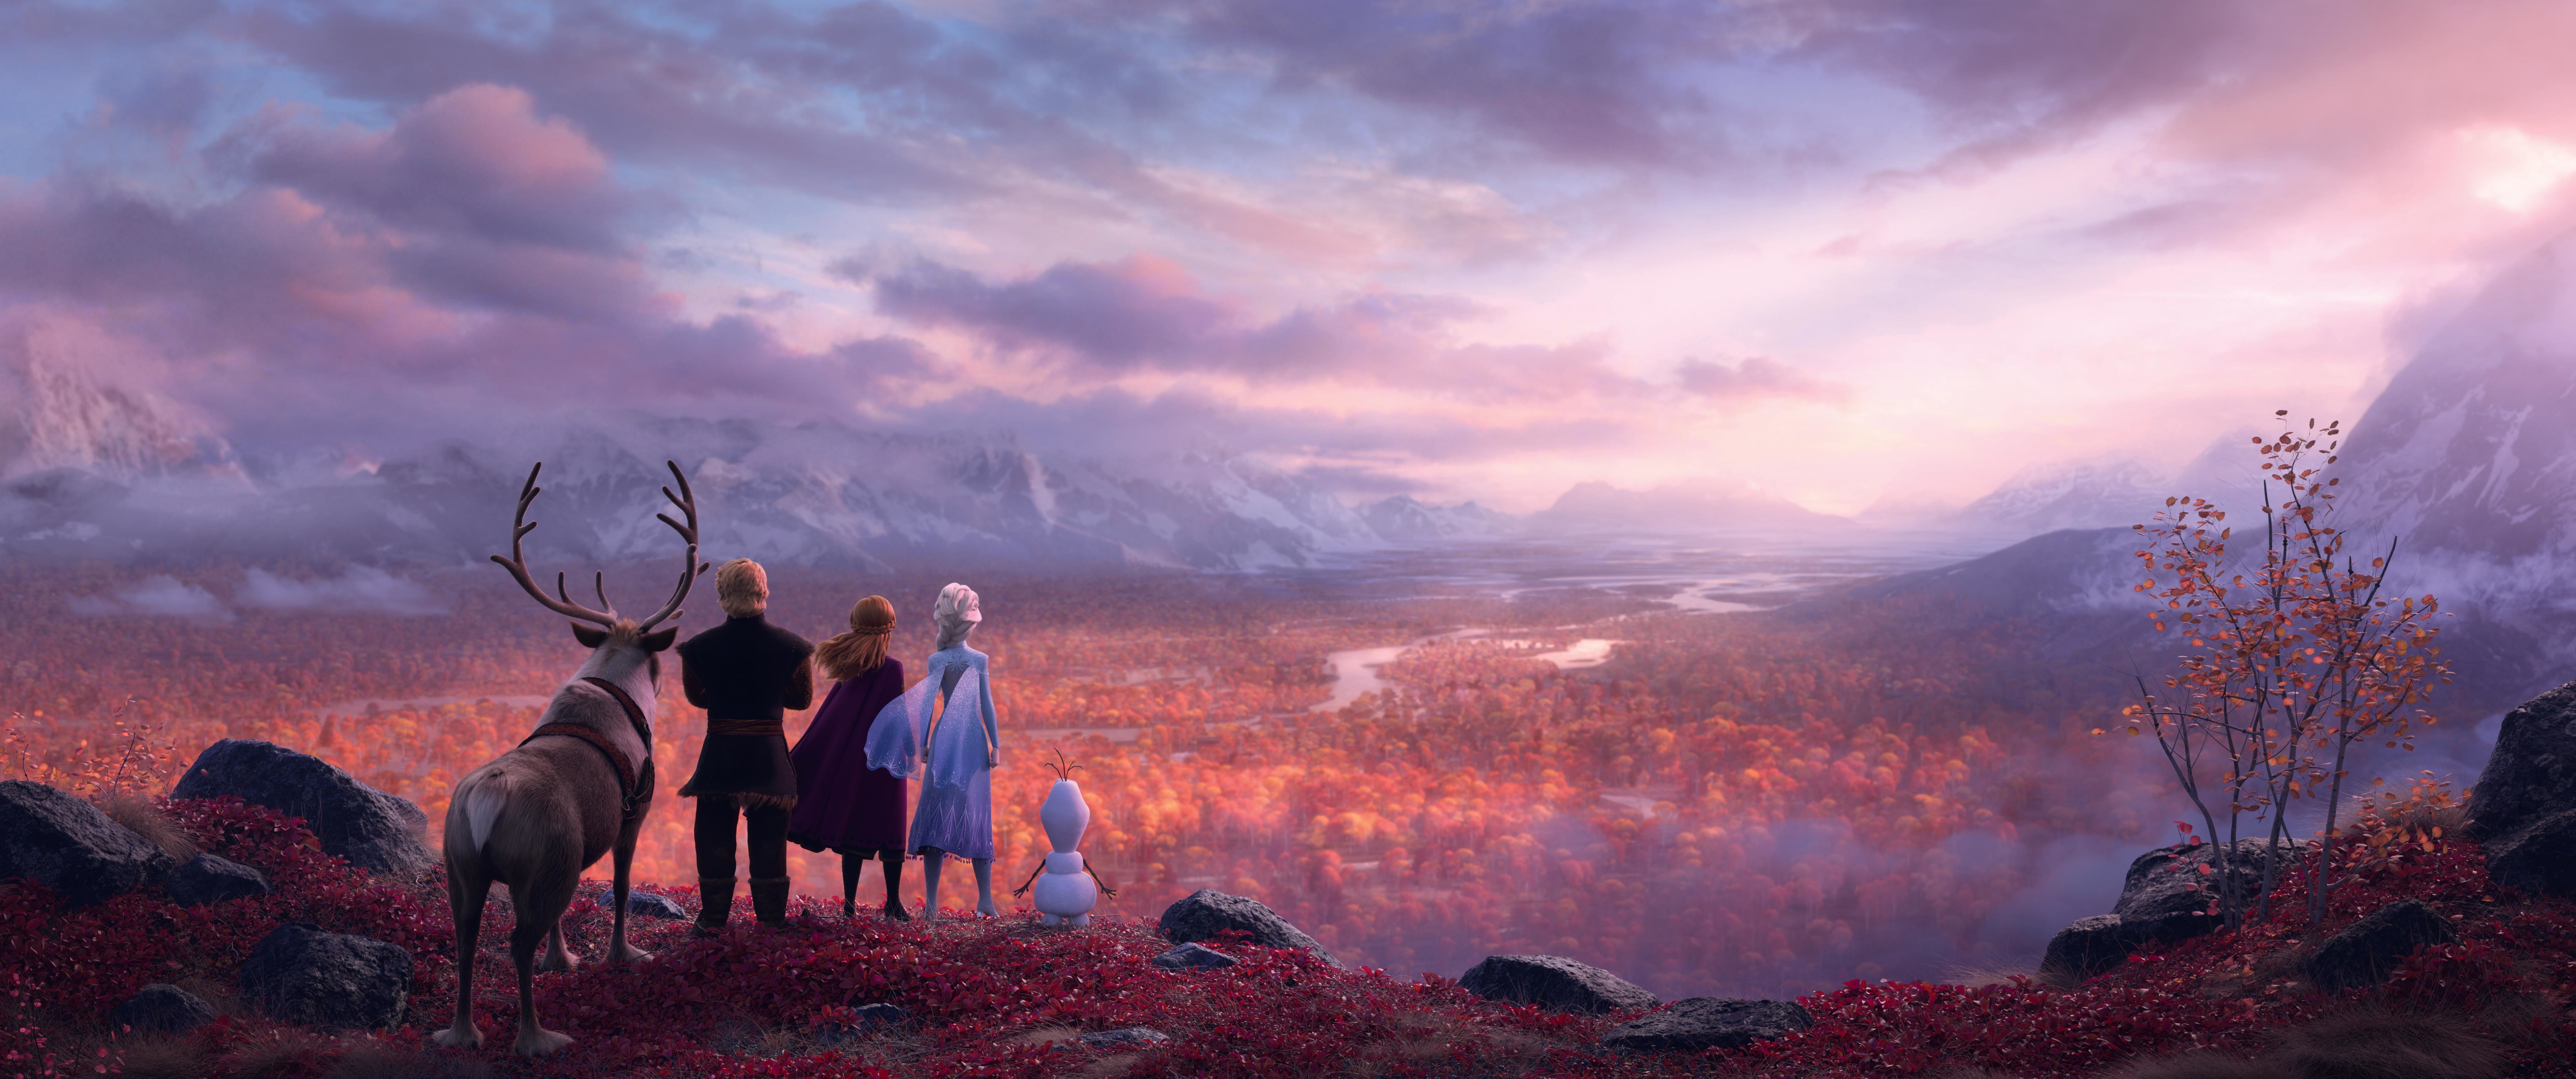 Frozen 2 Movie 2019 Wallpaper HD Movies 4K Wallpapers Images and  Background  Wallpapers Den